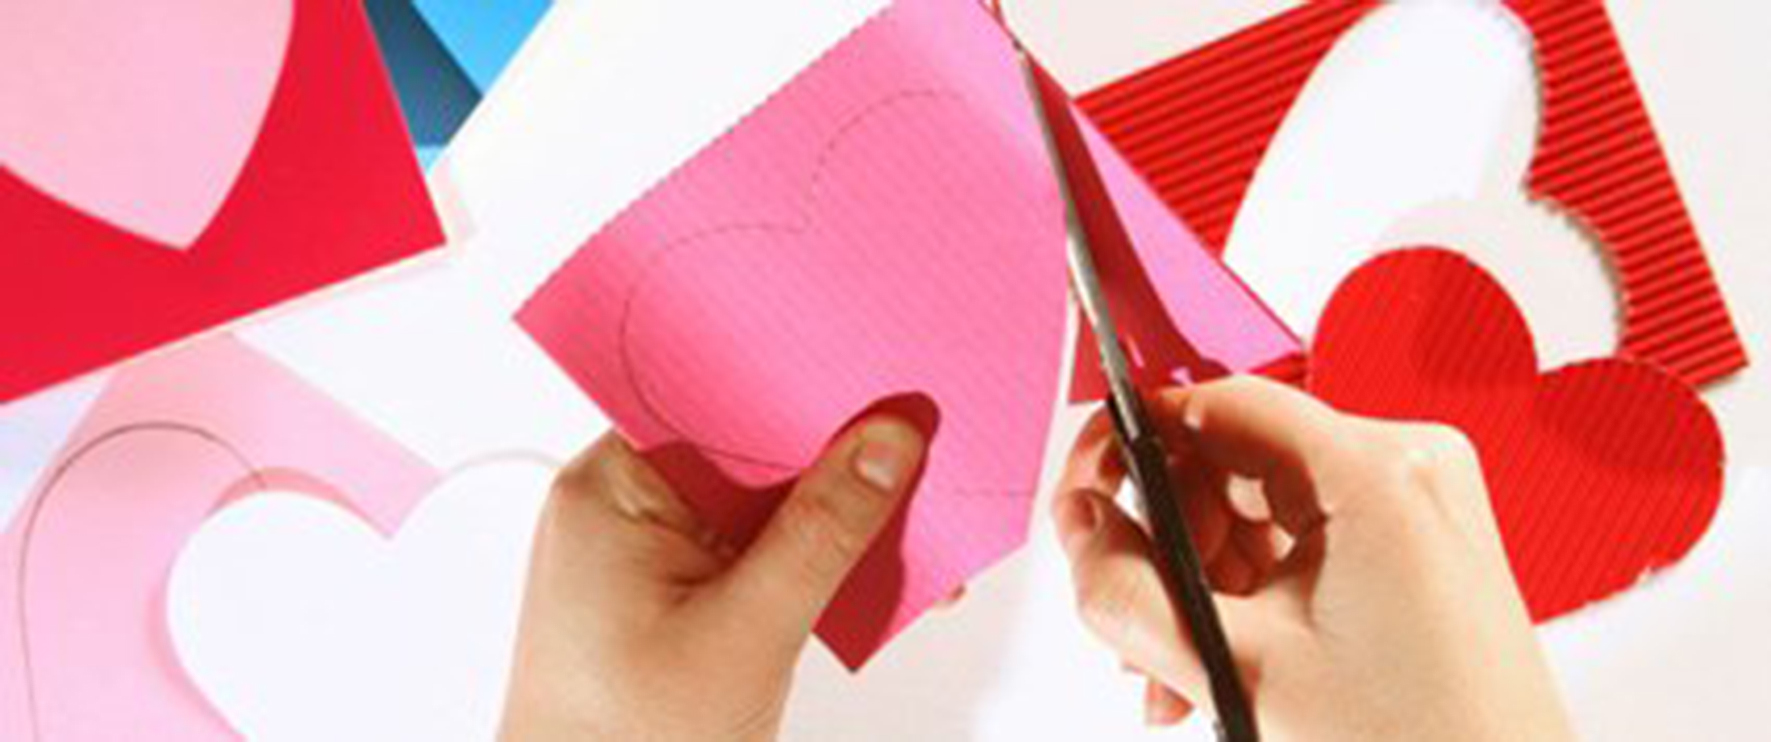 person using scissors to cut out red paper hearts